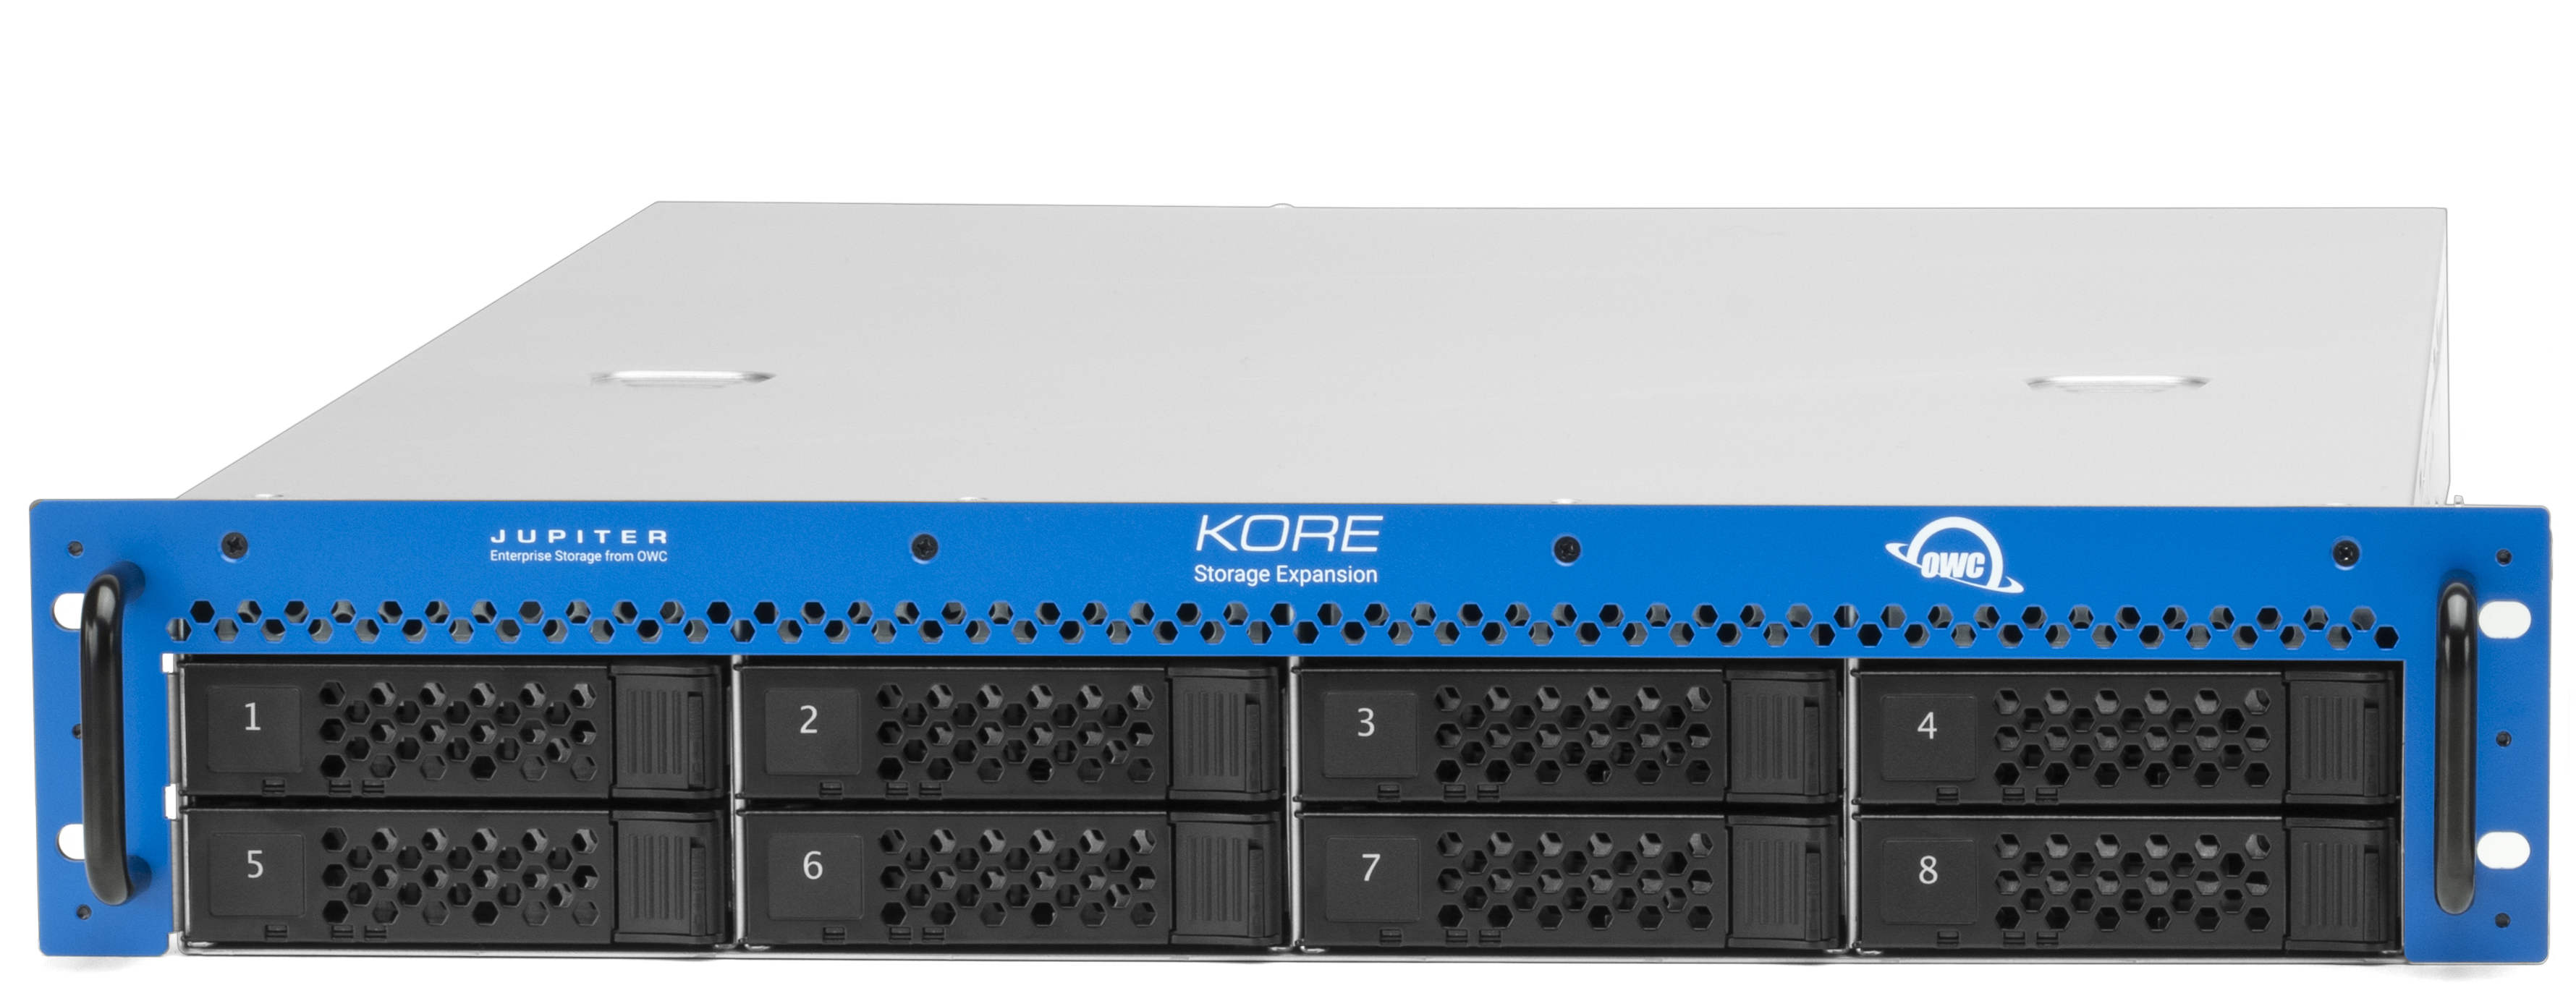 OWC Jupiter Kore with 8 Drives